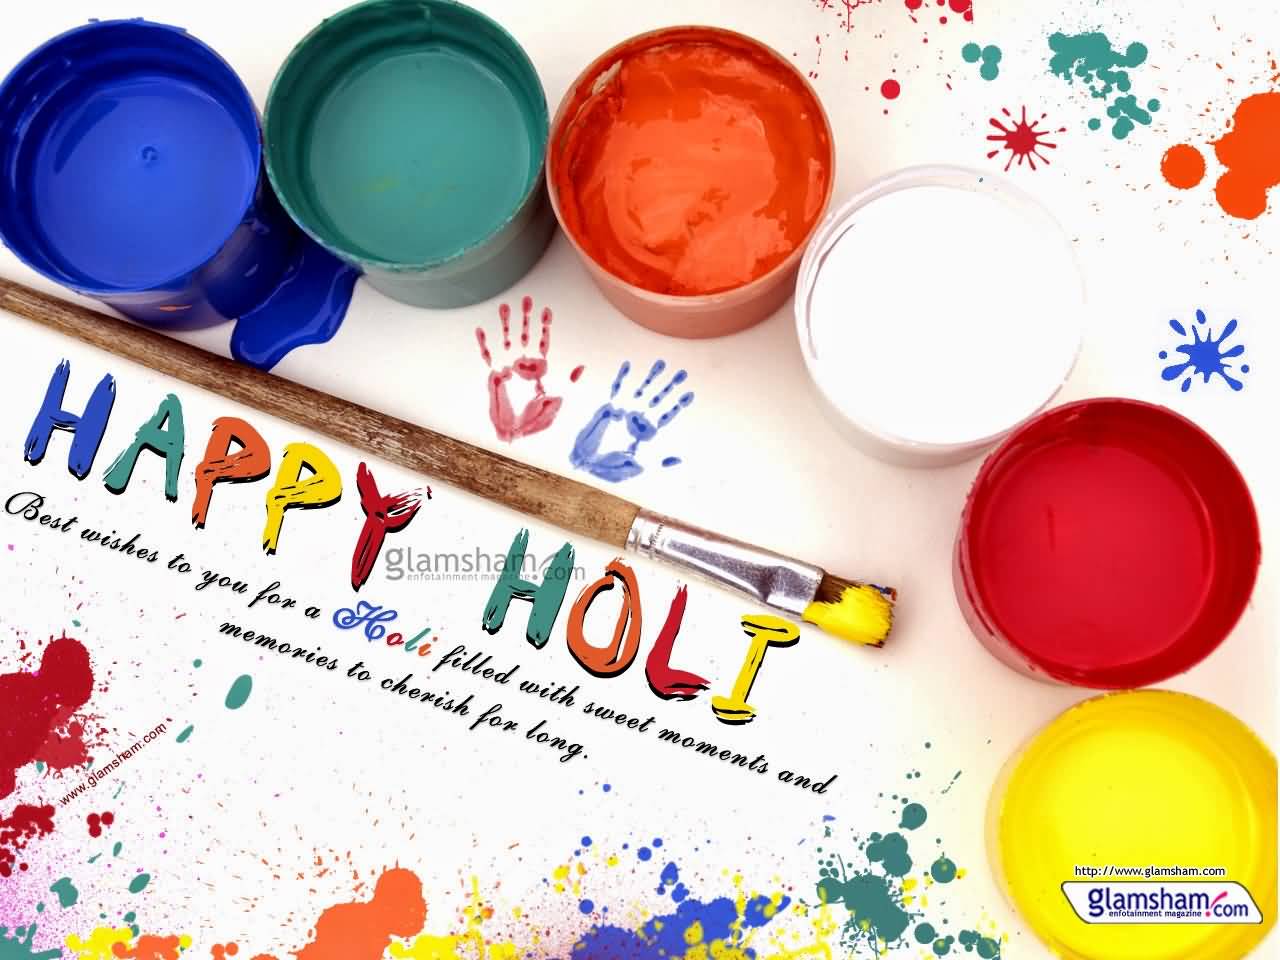 Happy Holi 2017 Best Wishes To youi For A Holi Filled With Sweet Moments And Memories To Cherish For Long